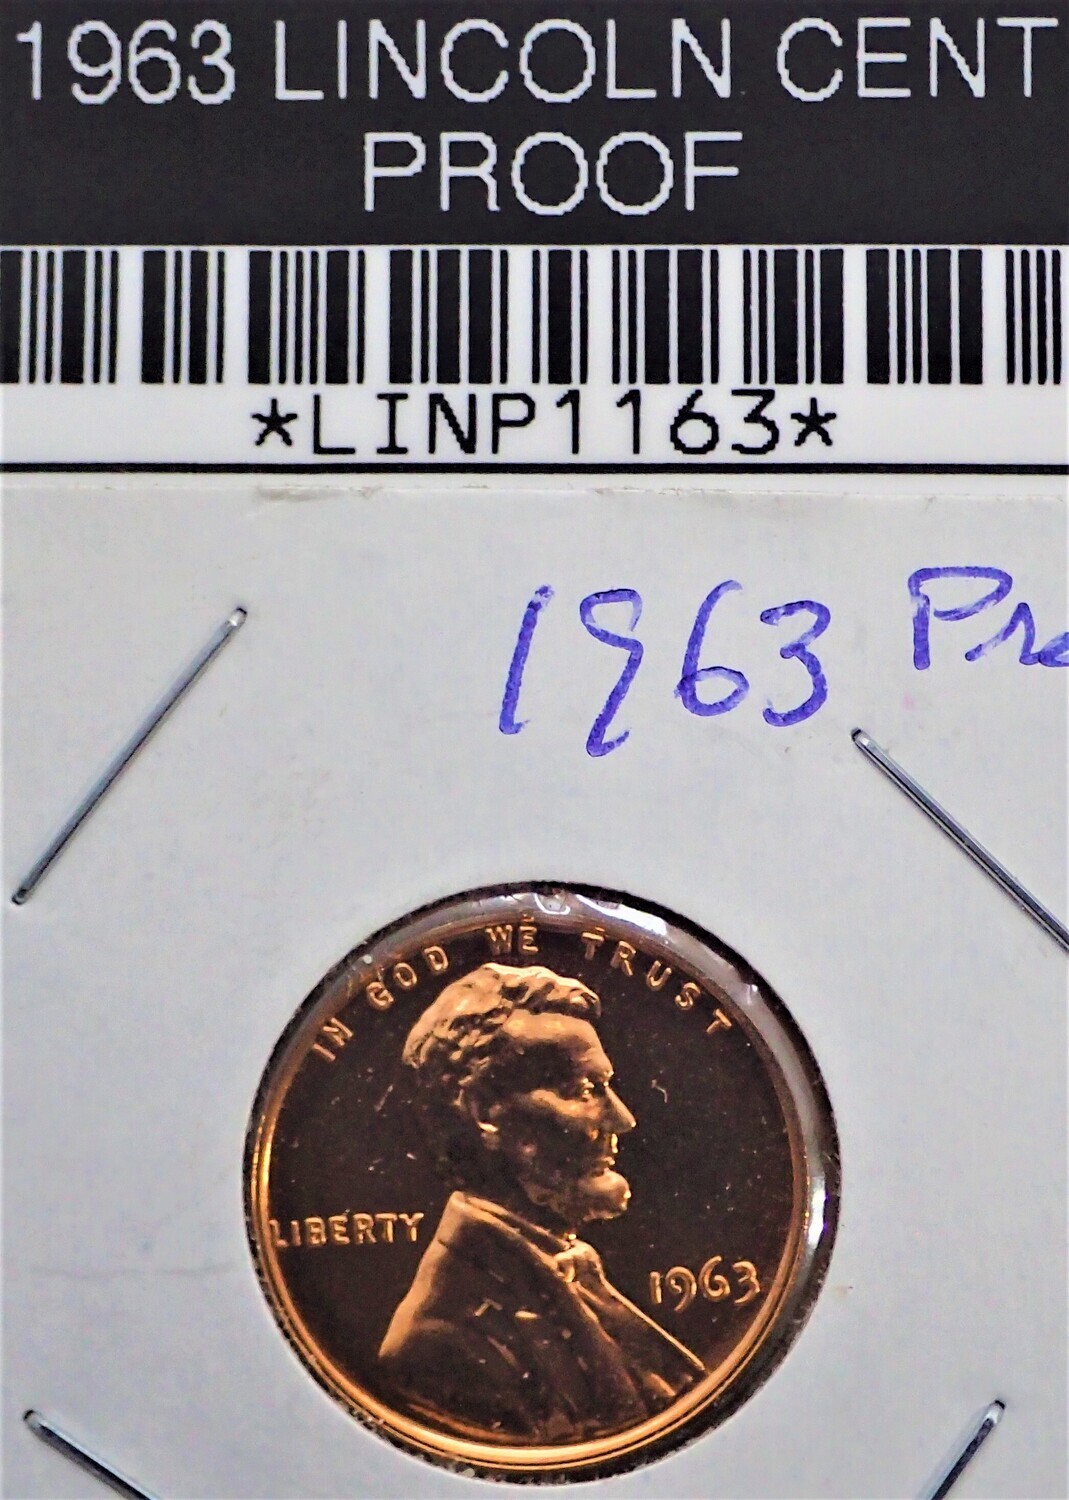 1963 LINCOLN CENT PROOF LINP1163